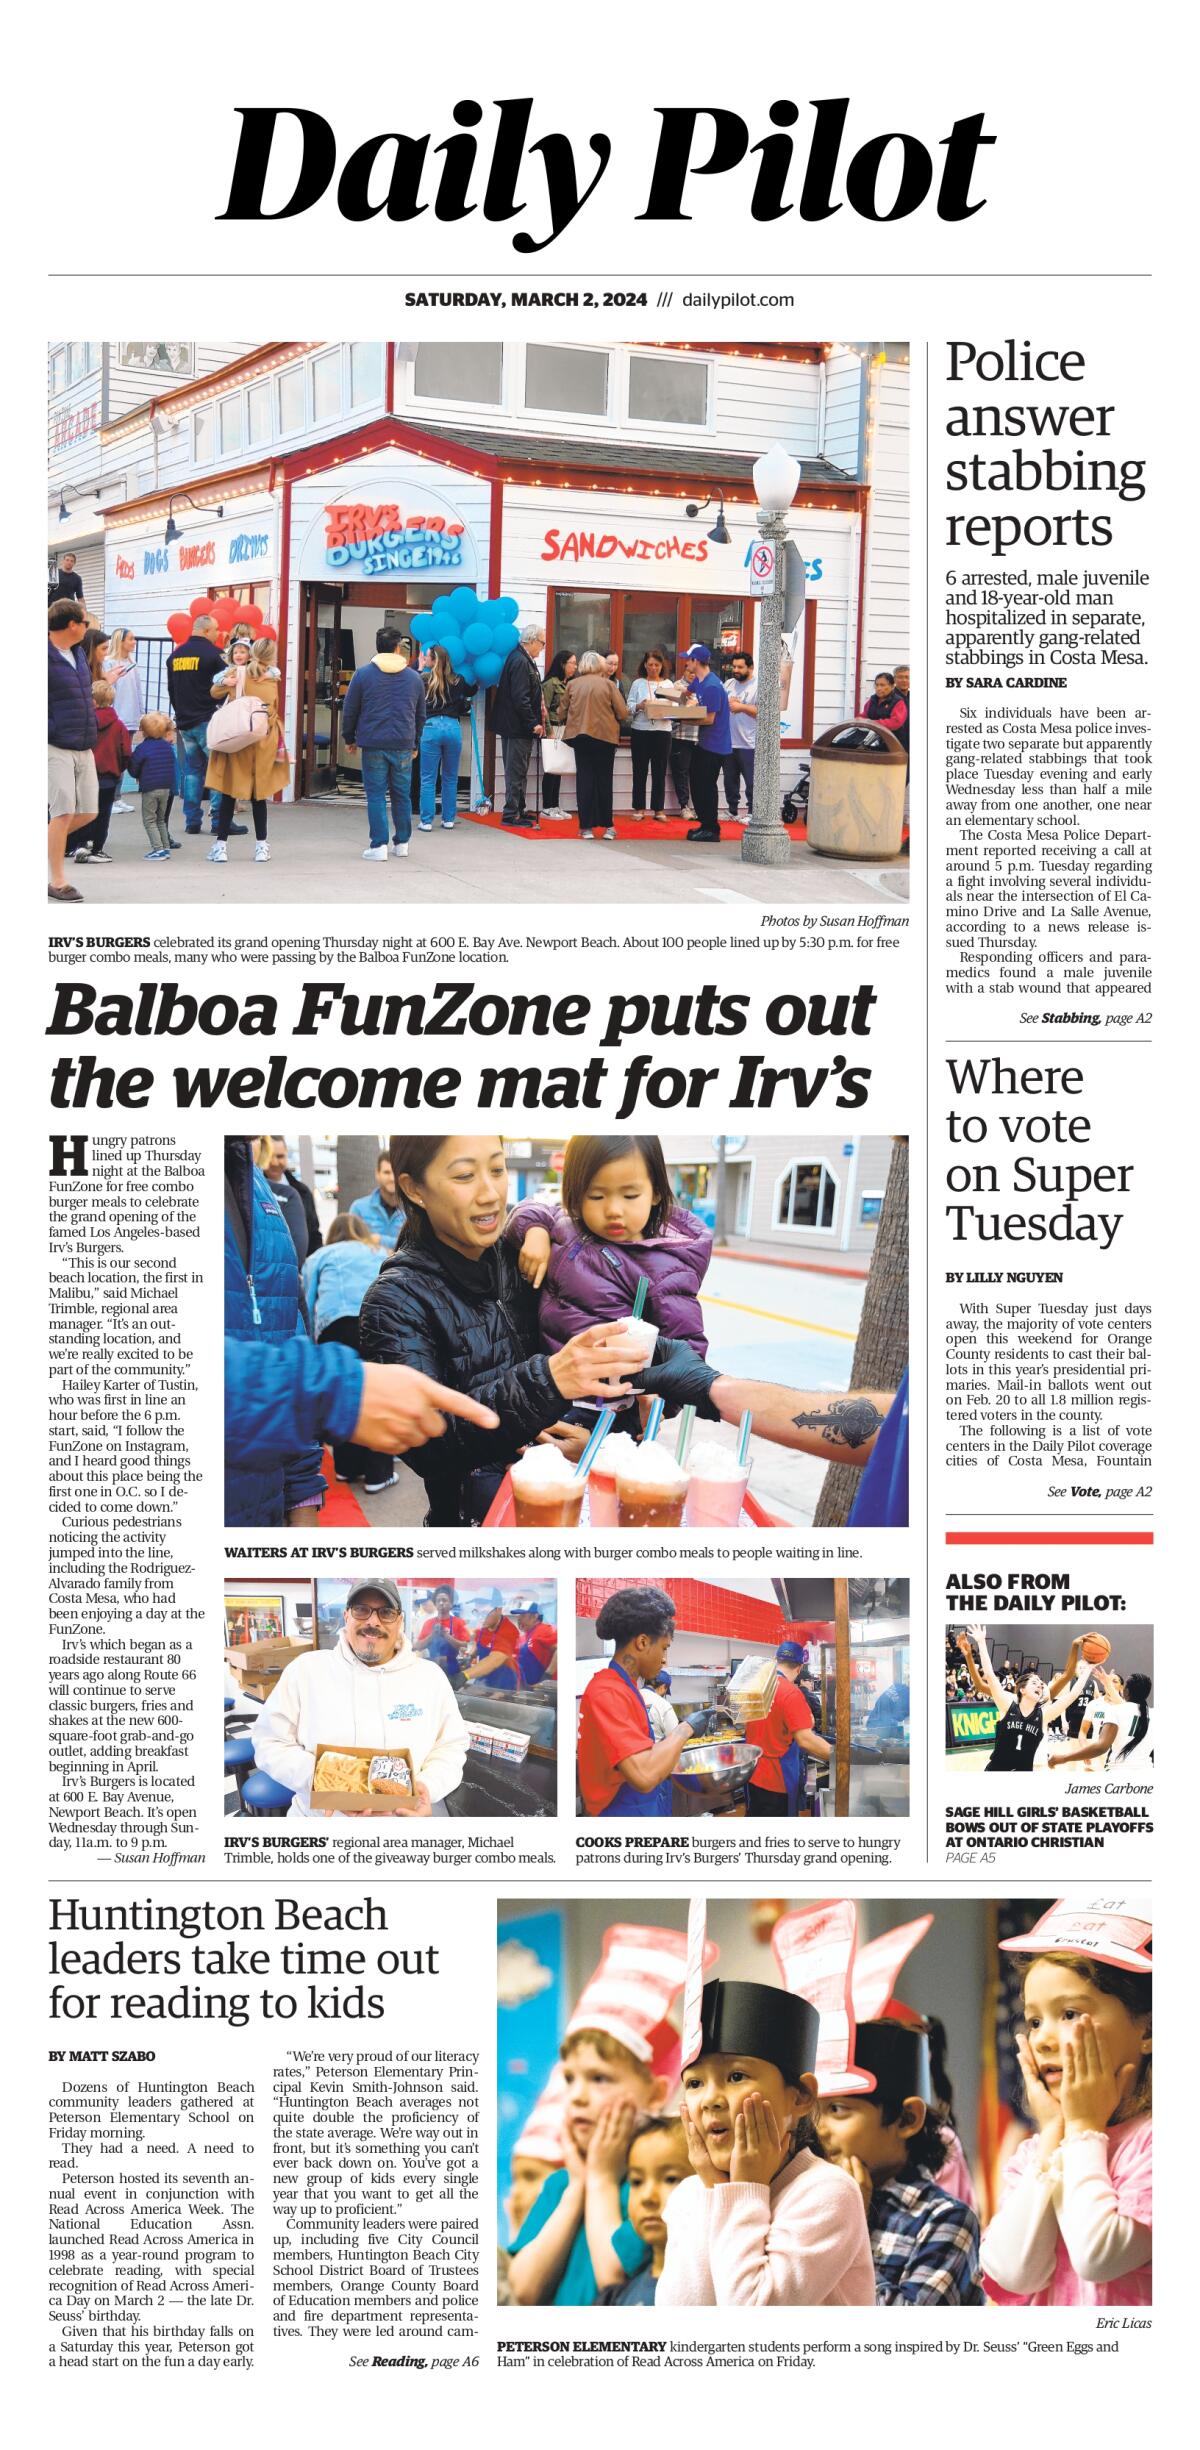 Front page of the Daily Pilot e-newspaper for Saturday, March 2, 2024.